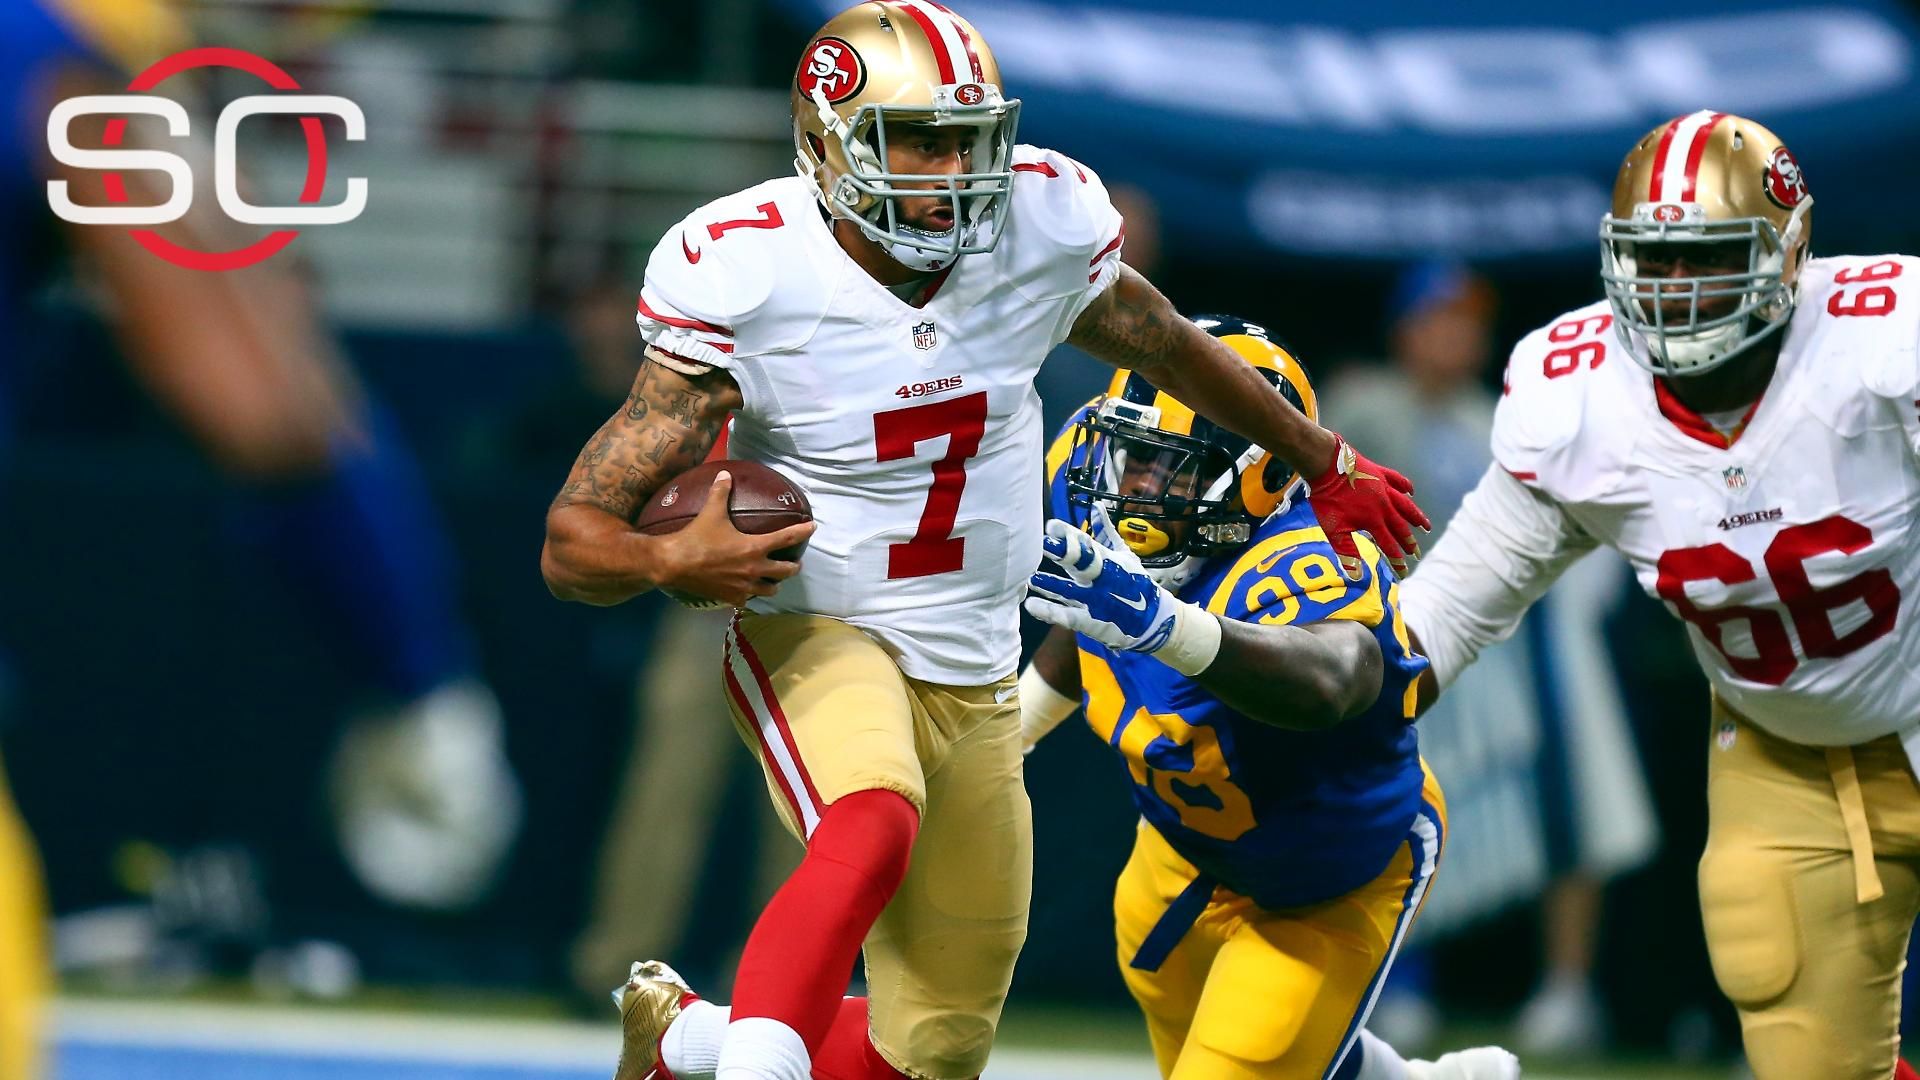 Kapernick's surgery another crack in divide with 49ers?